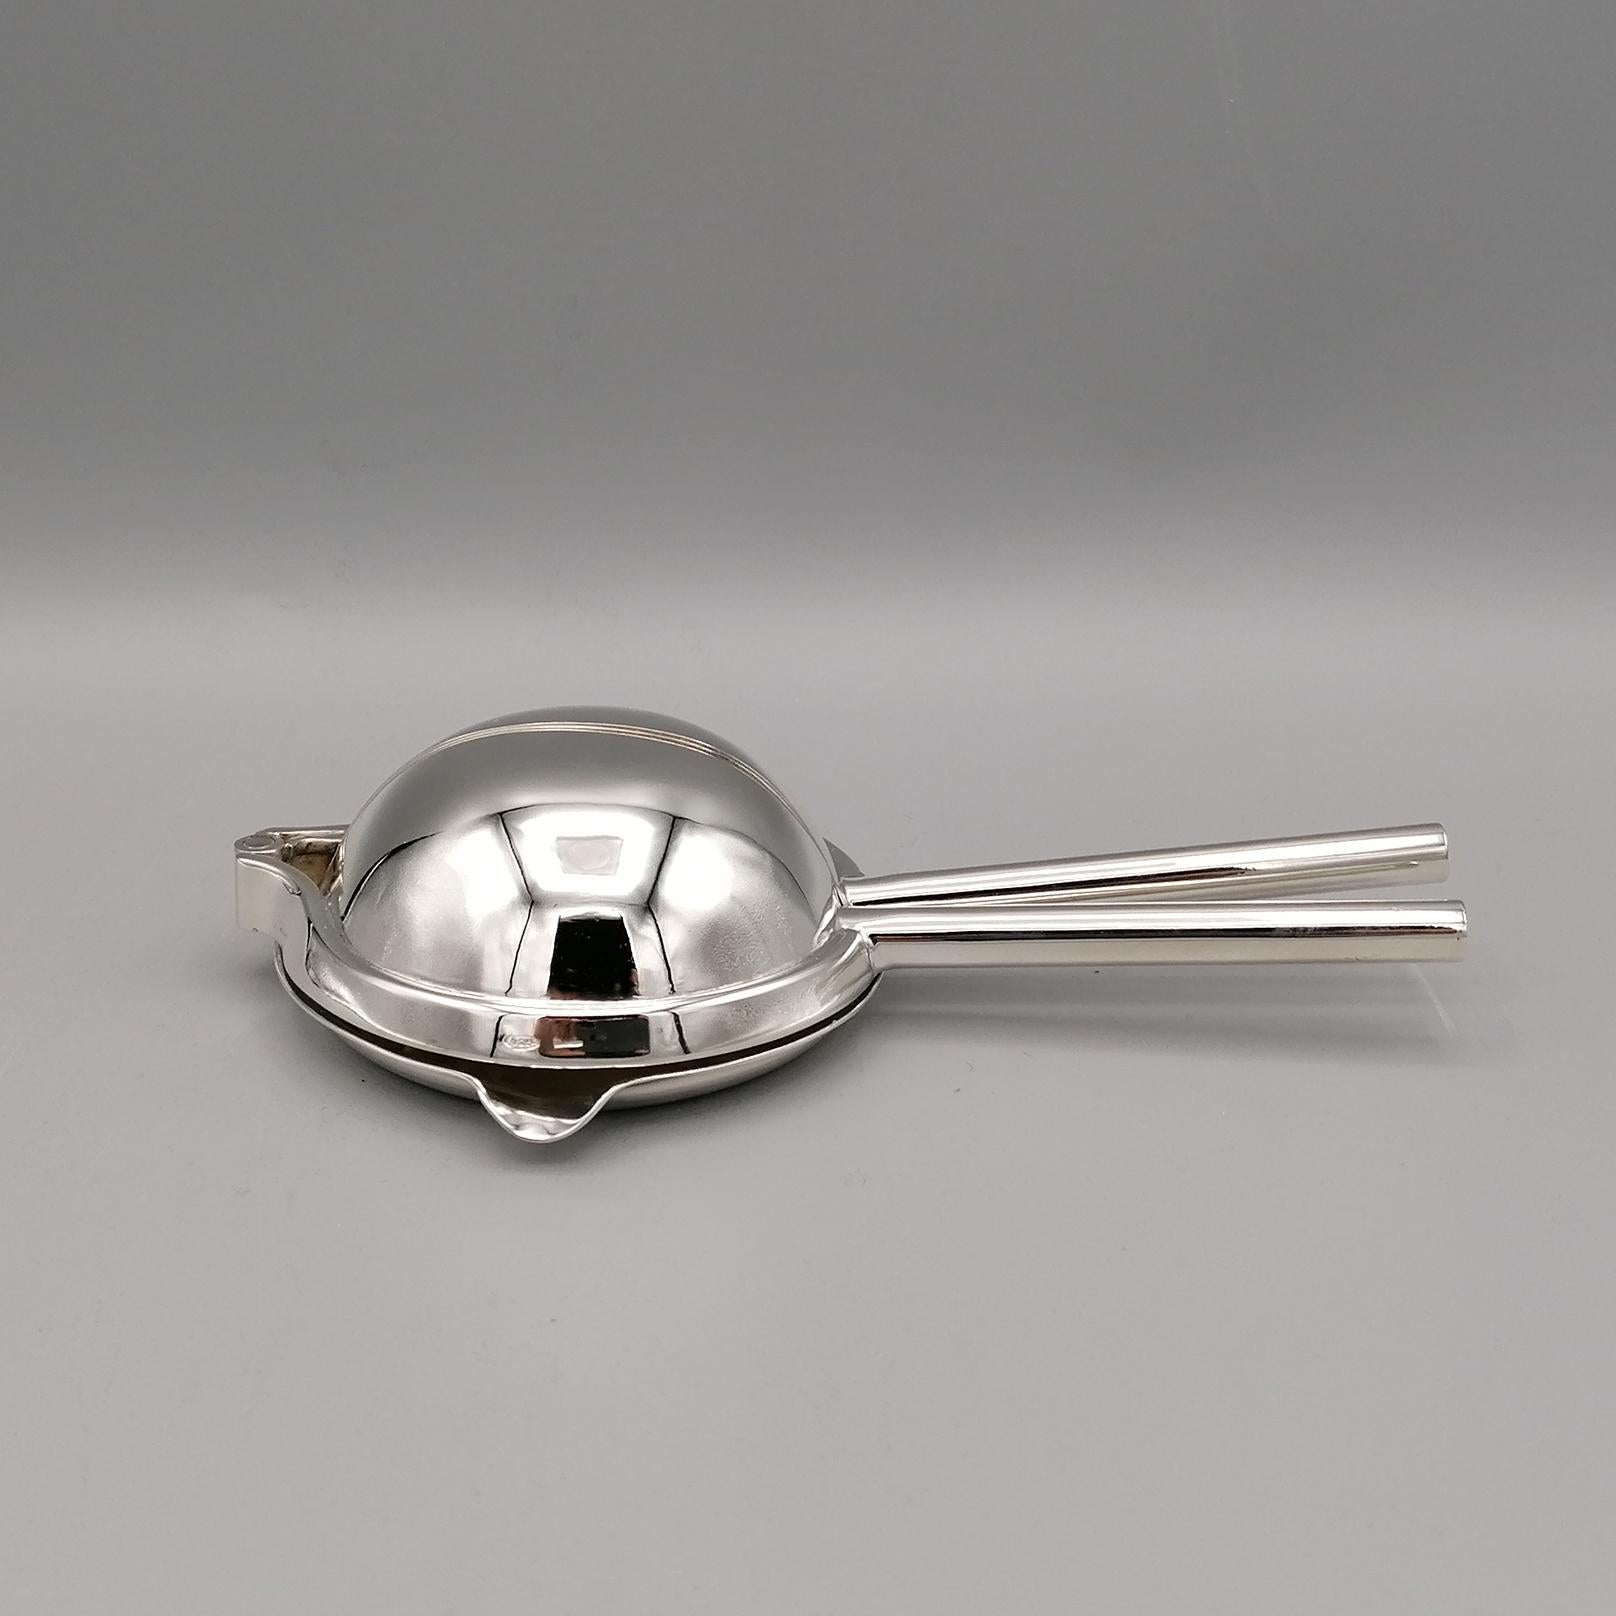 Squeezer in sterling silver.
The juicer is divided into two hinged parts. 
It opens horizontally allowing you to place the slice of lemon or orange to be subsequently pressed to make sure that the juice comes out of the special spout. 
The body